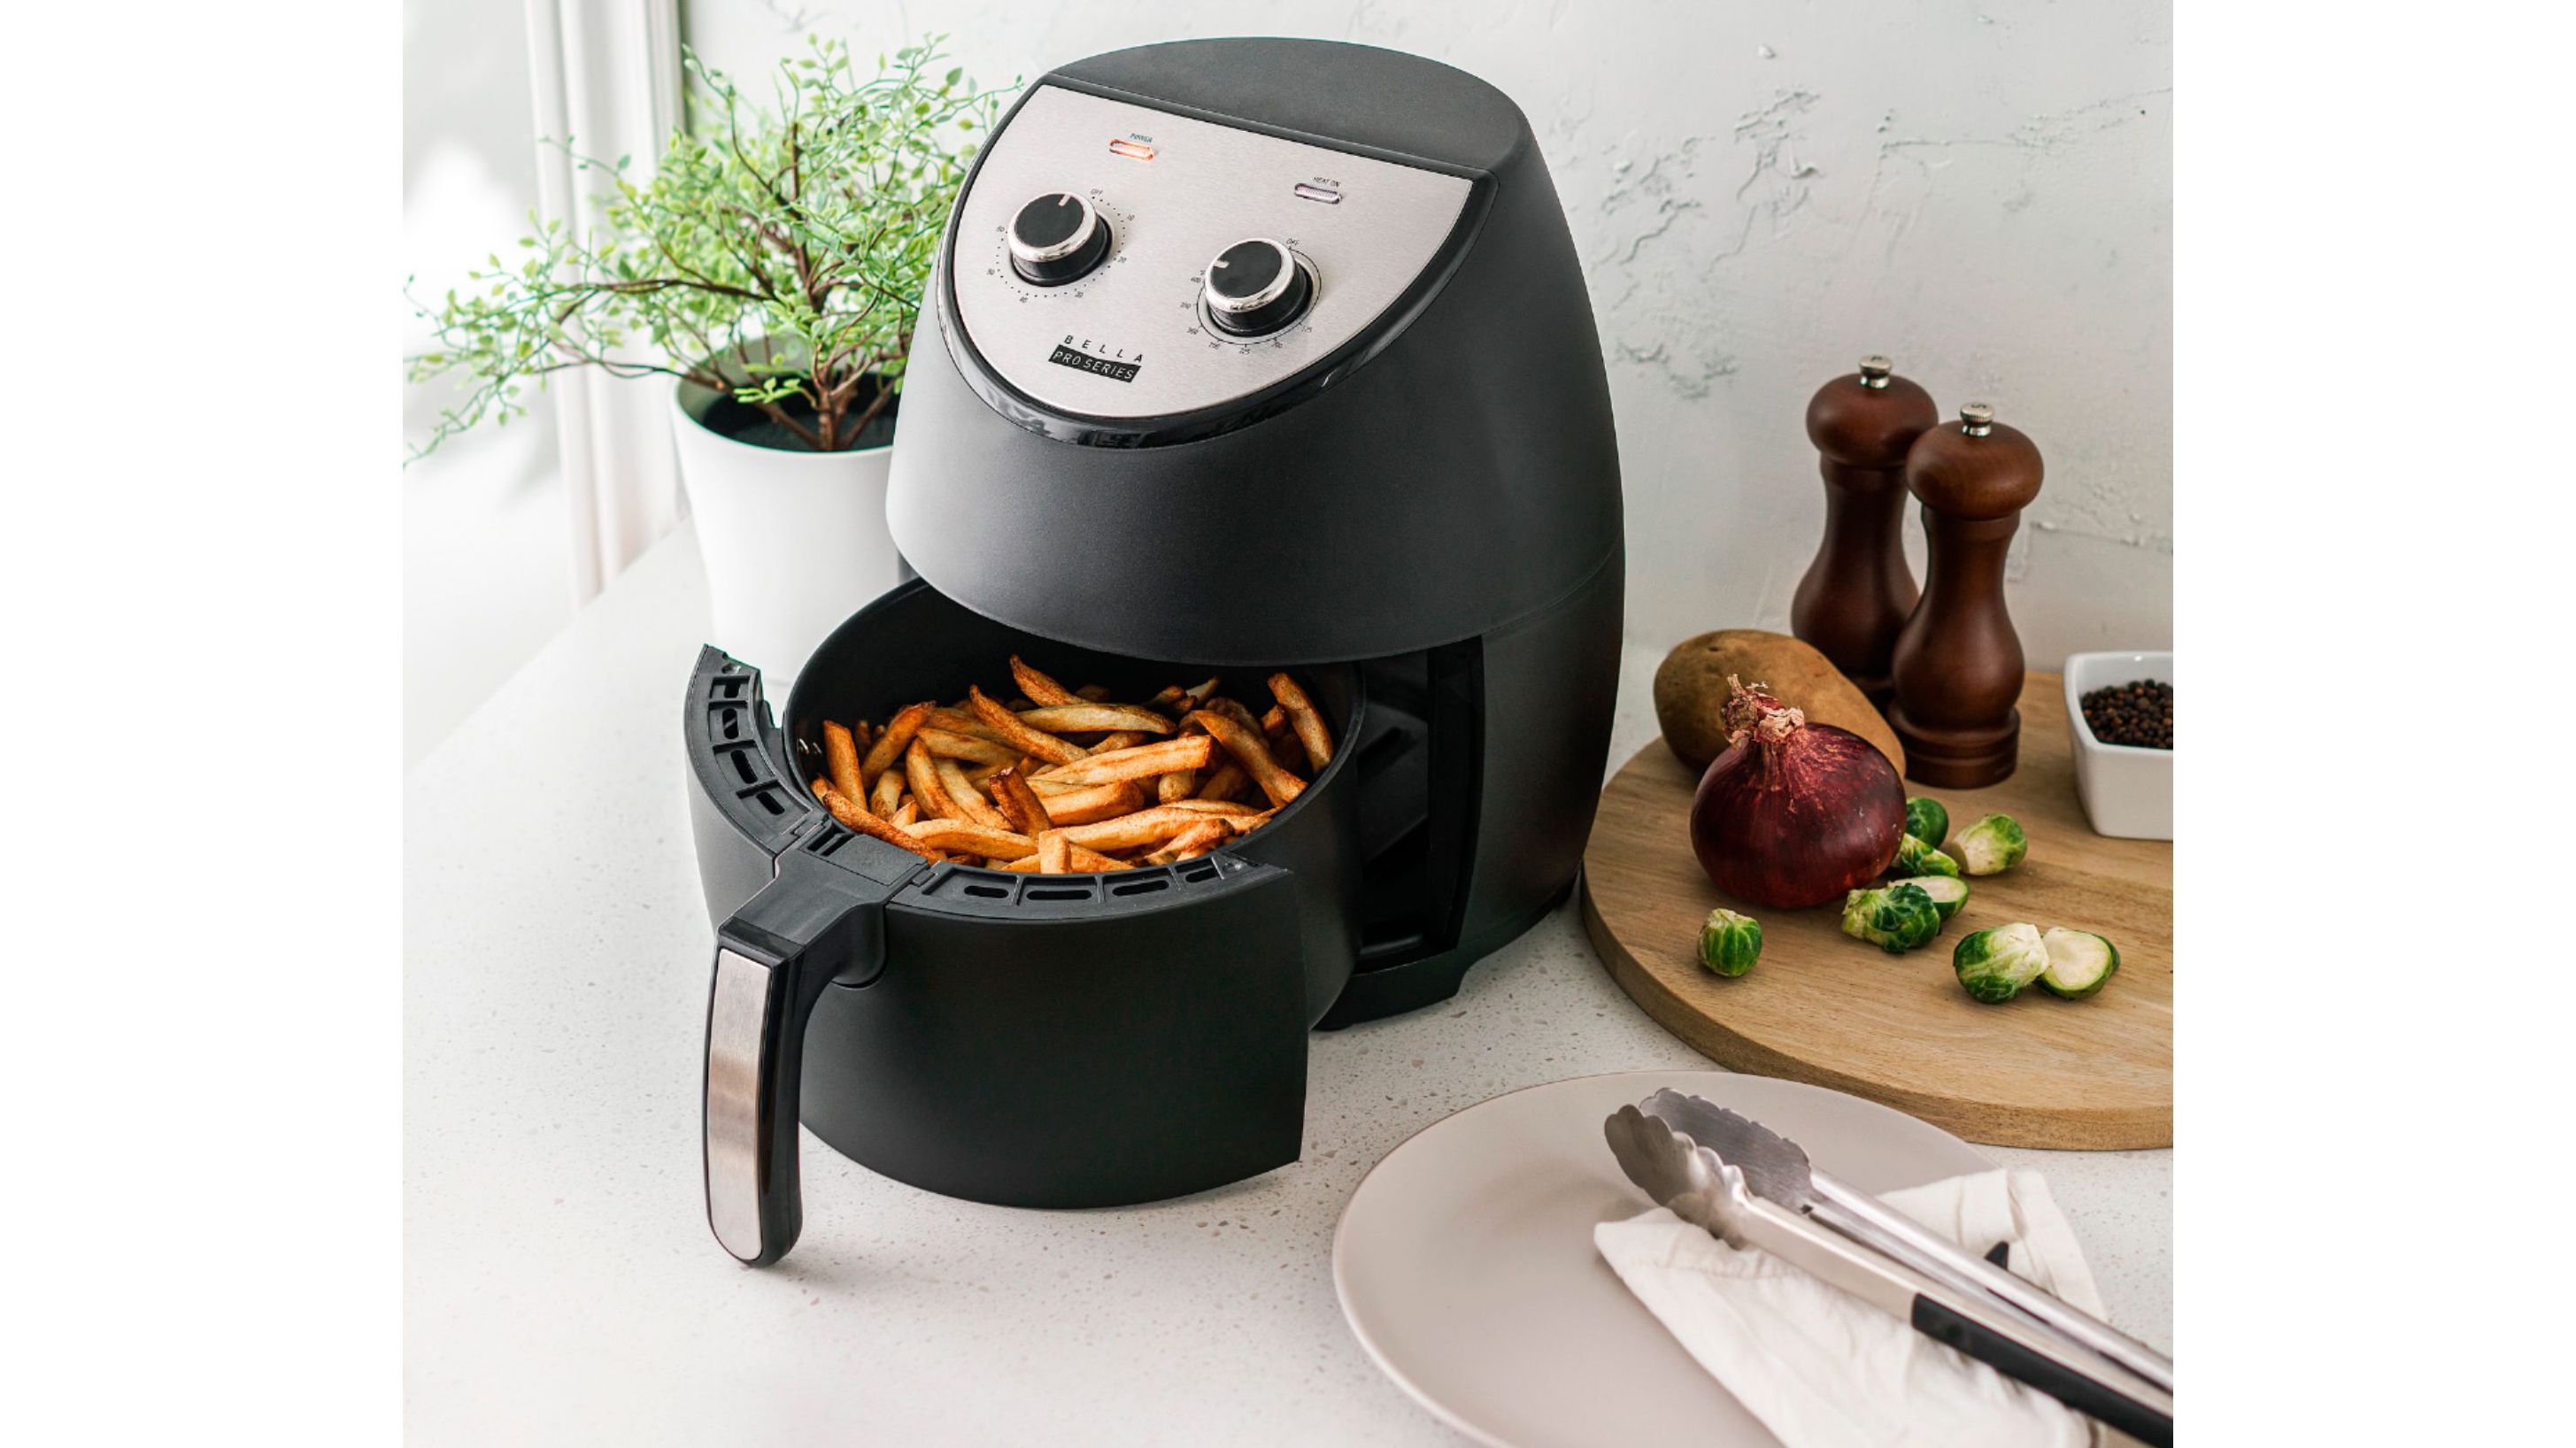 Bella 17275 Air Fryer Review - Consumer Reports